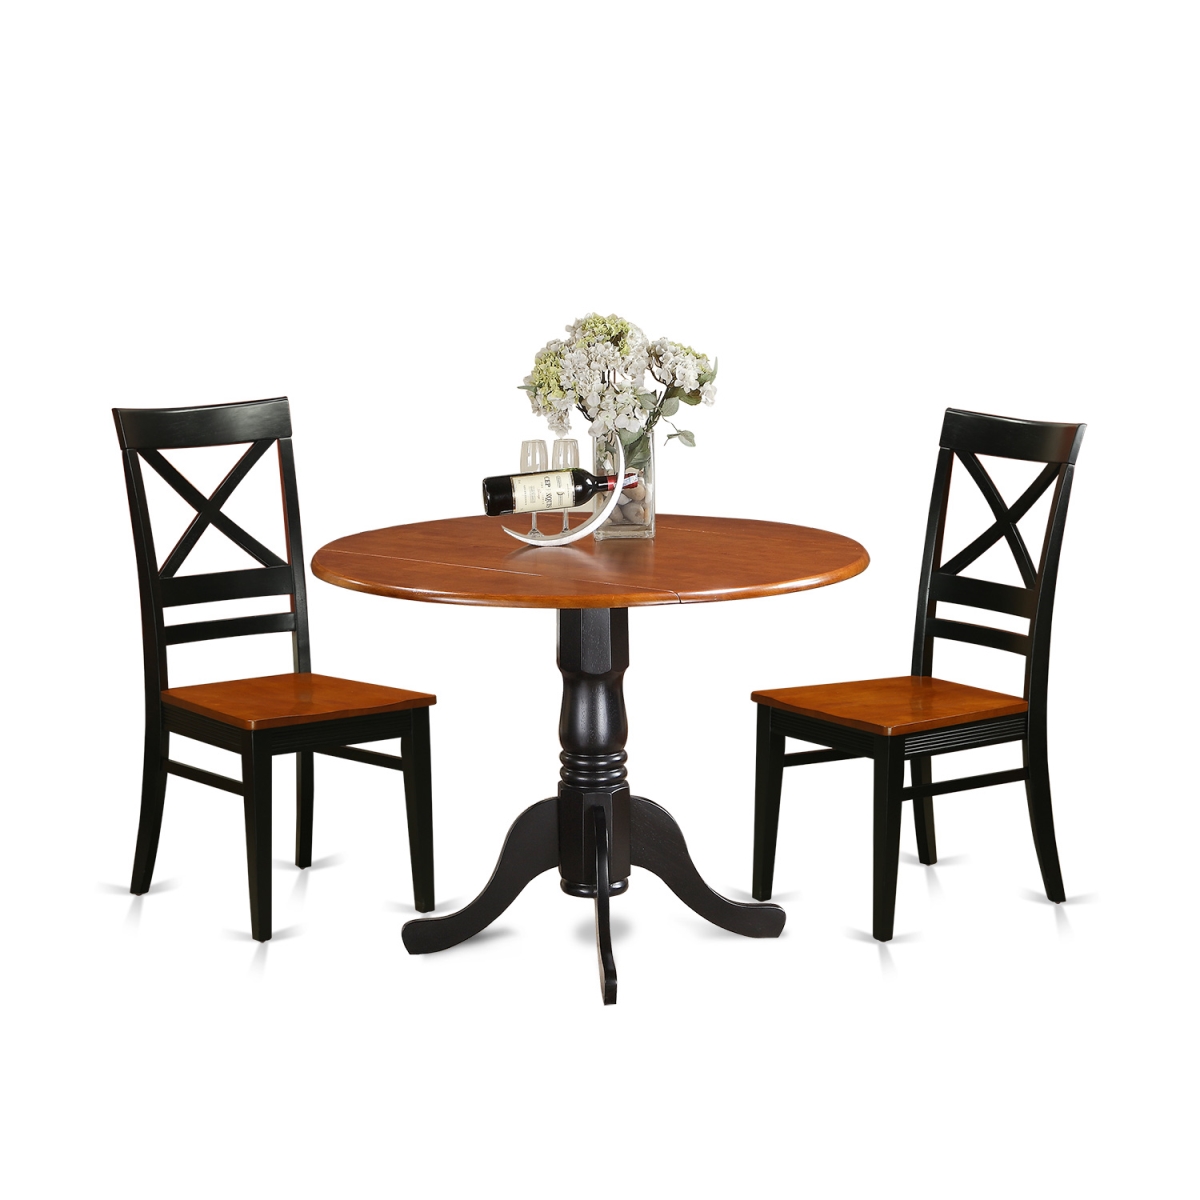 Picture of East West Furniture DLQU3-BCH-W Wood Seat Dublin Kitchen Table Set - Dining Table & 2 Wooden Chairs, Black & Cherry - 3 Piece